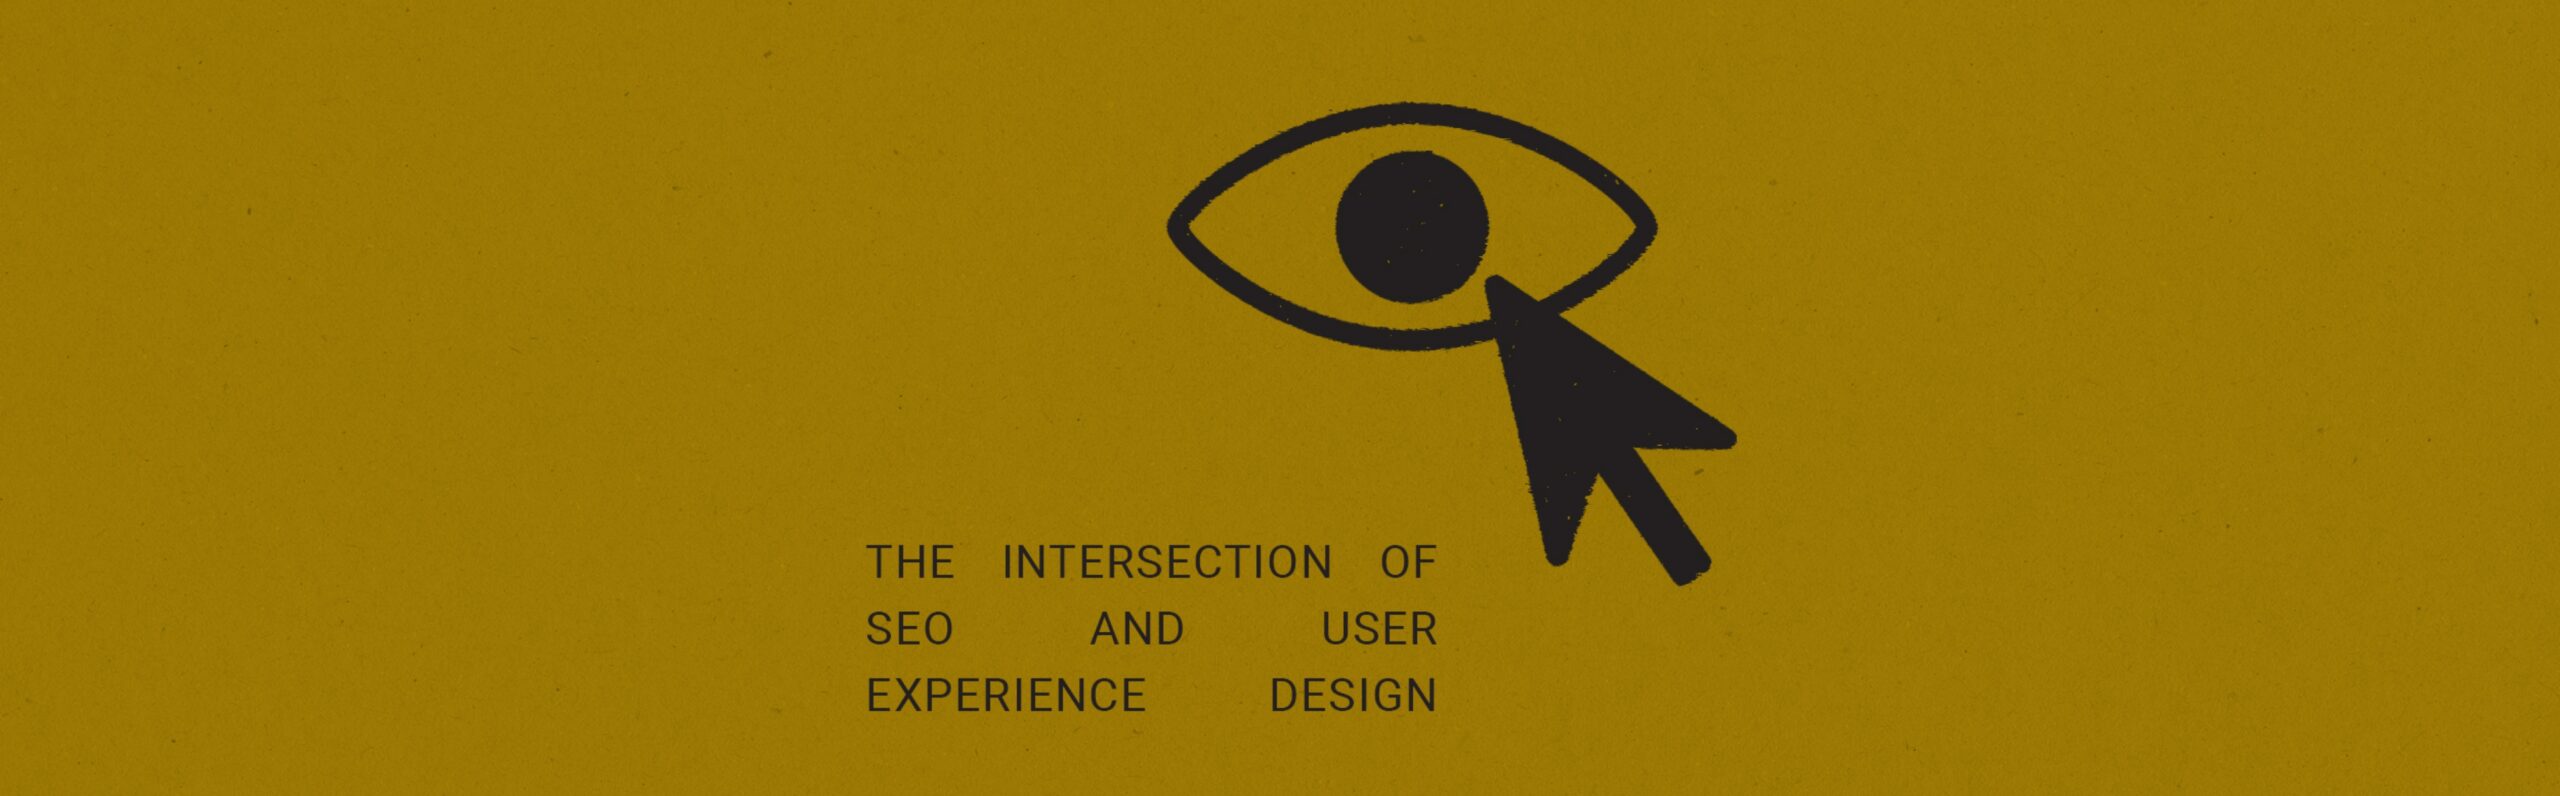 The Intersection of SEO and User Experience (UX) Design